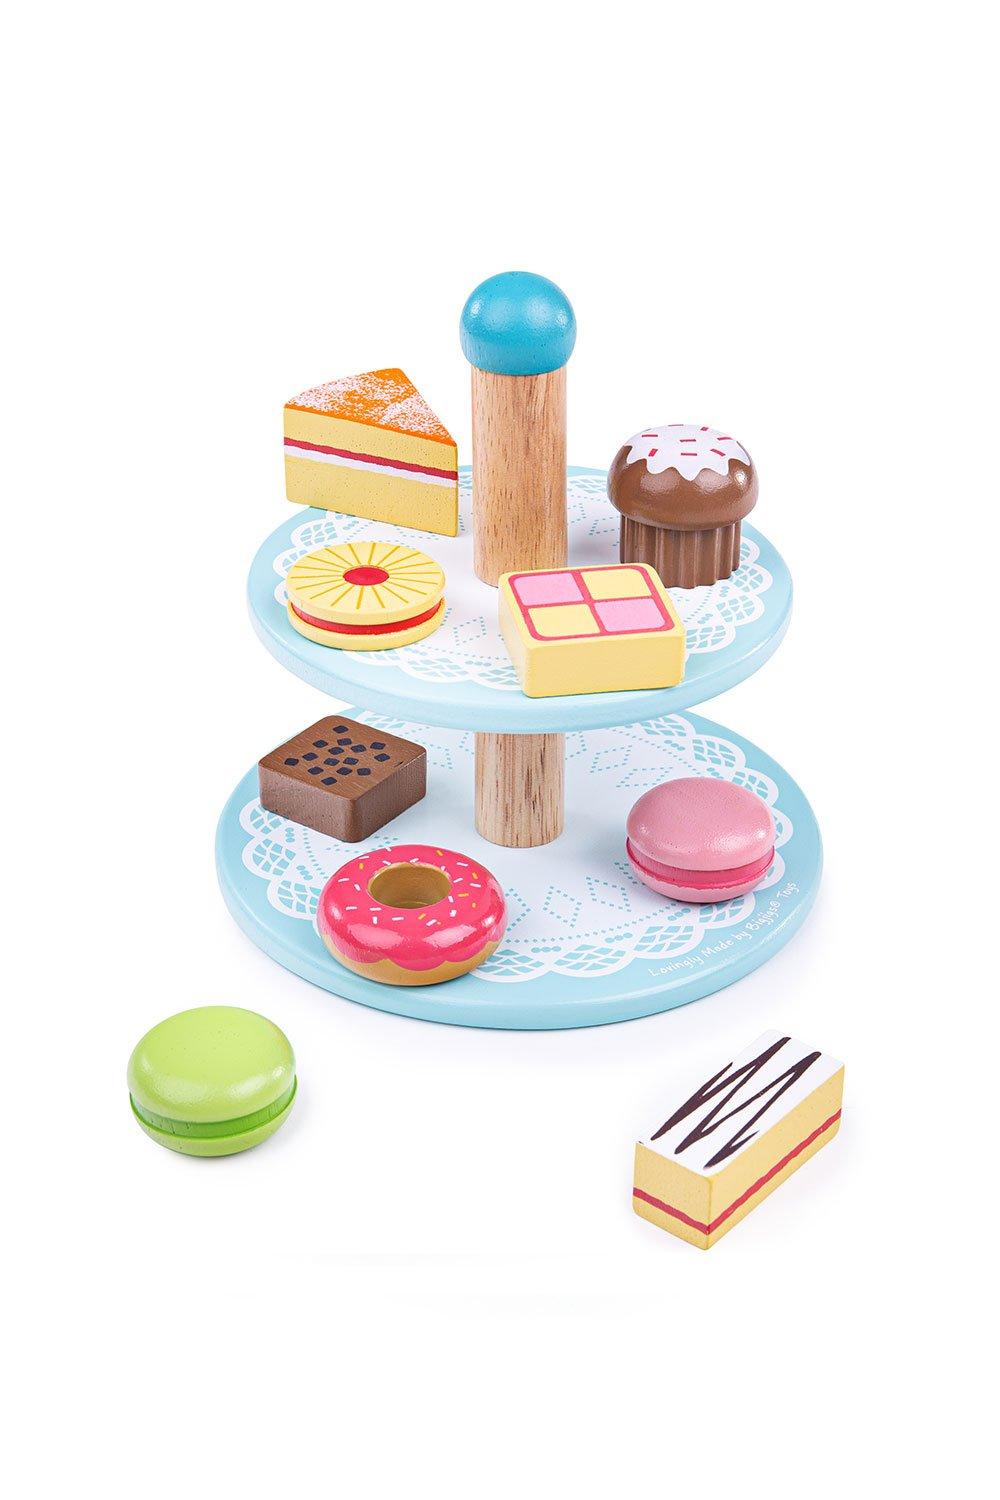 Cake Stand with Cakes Toy